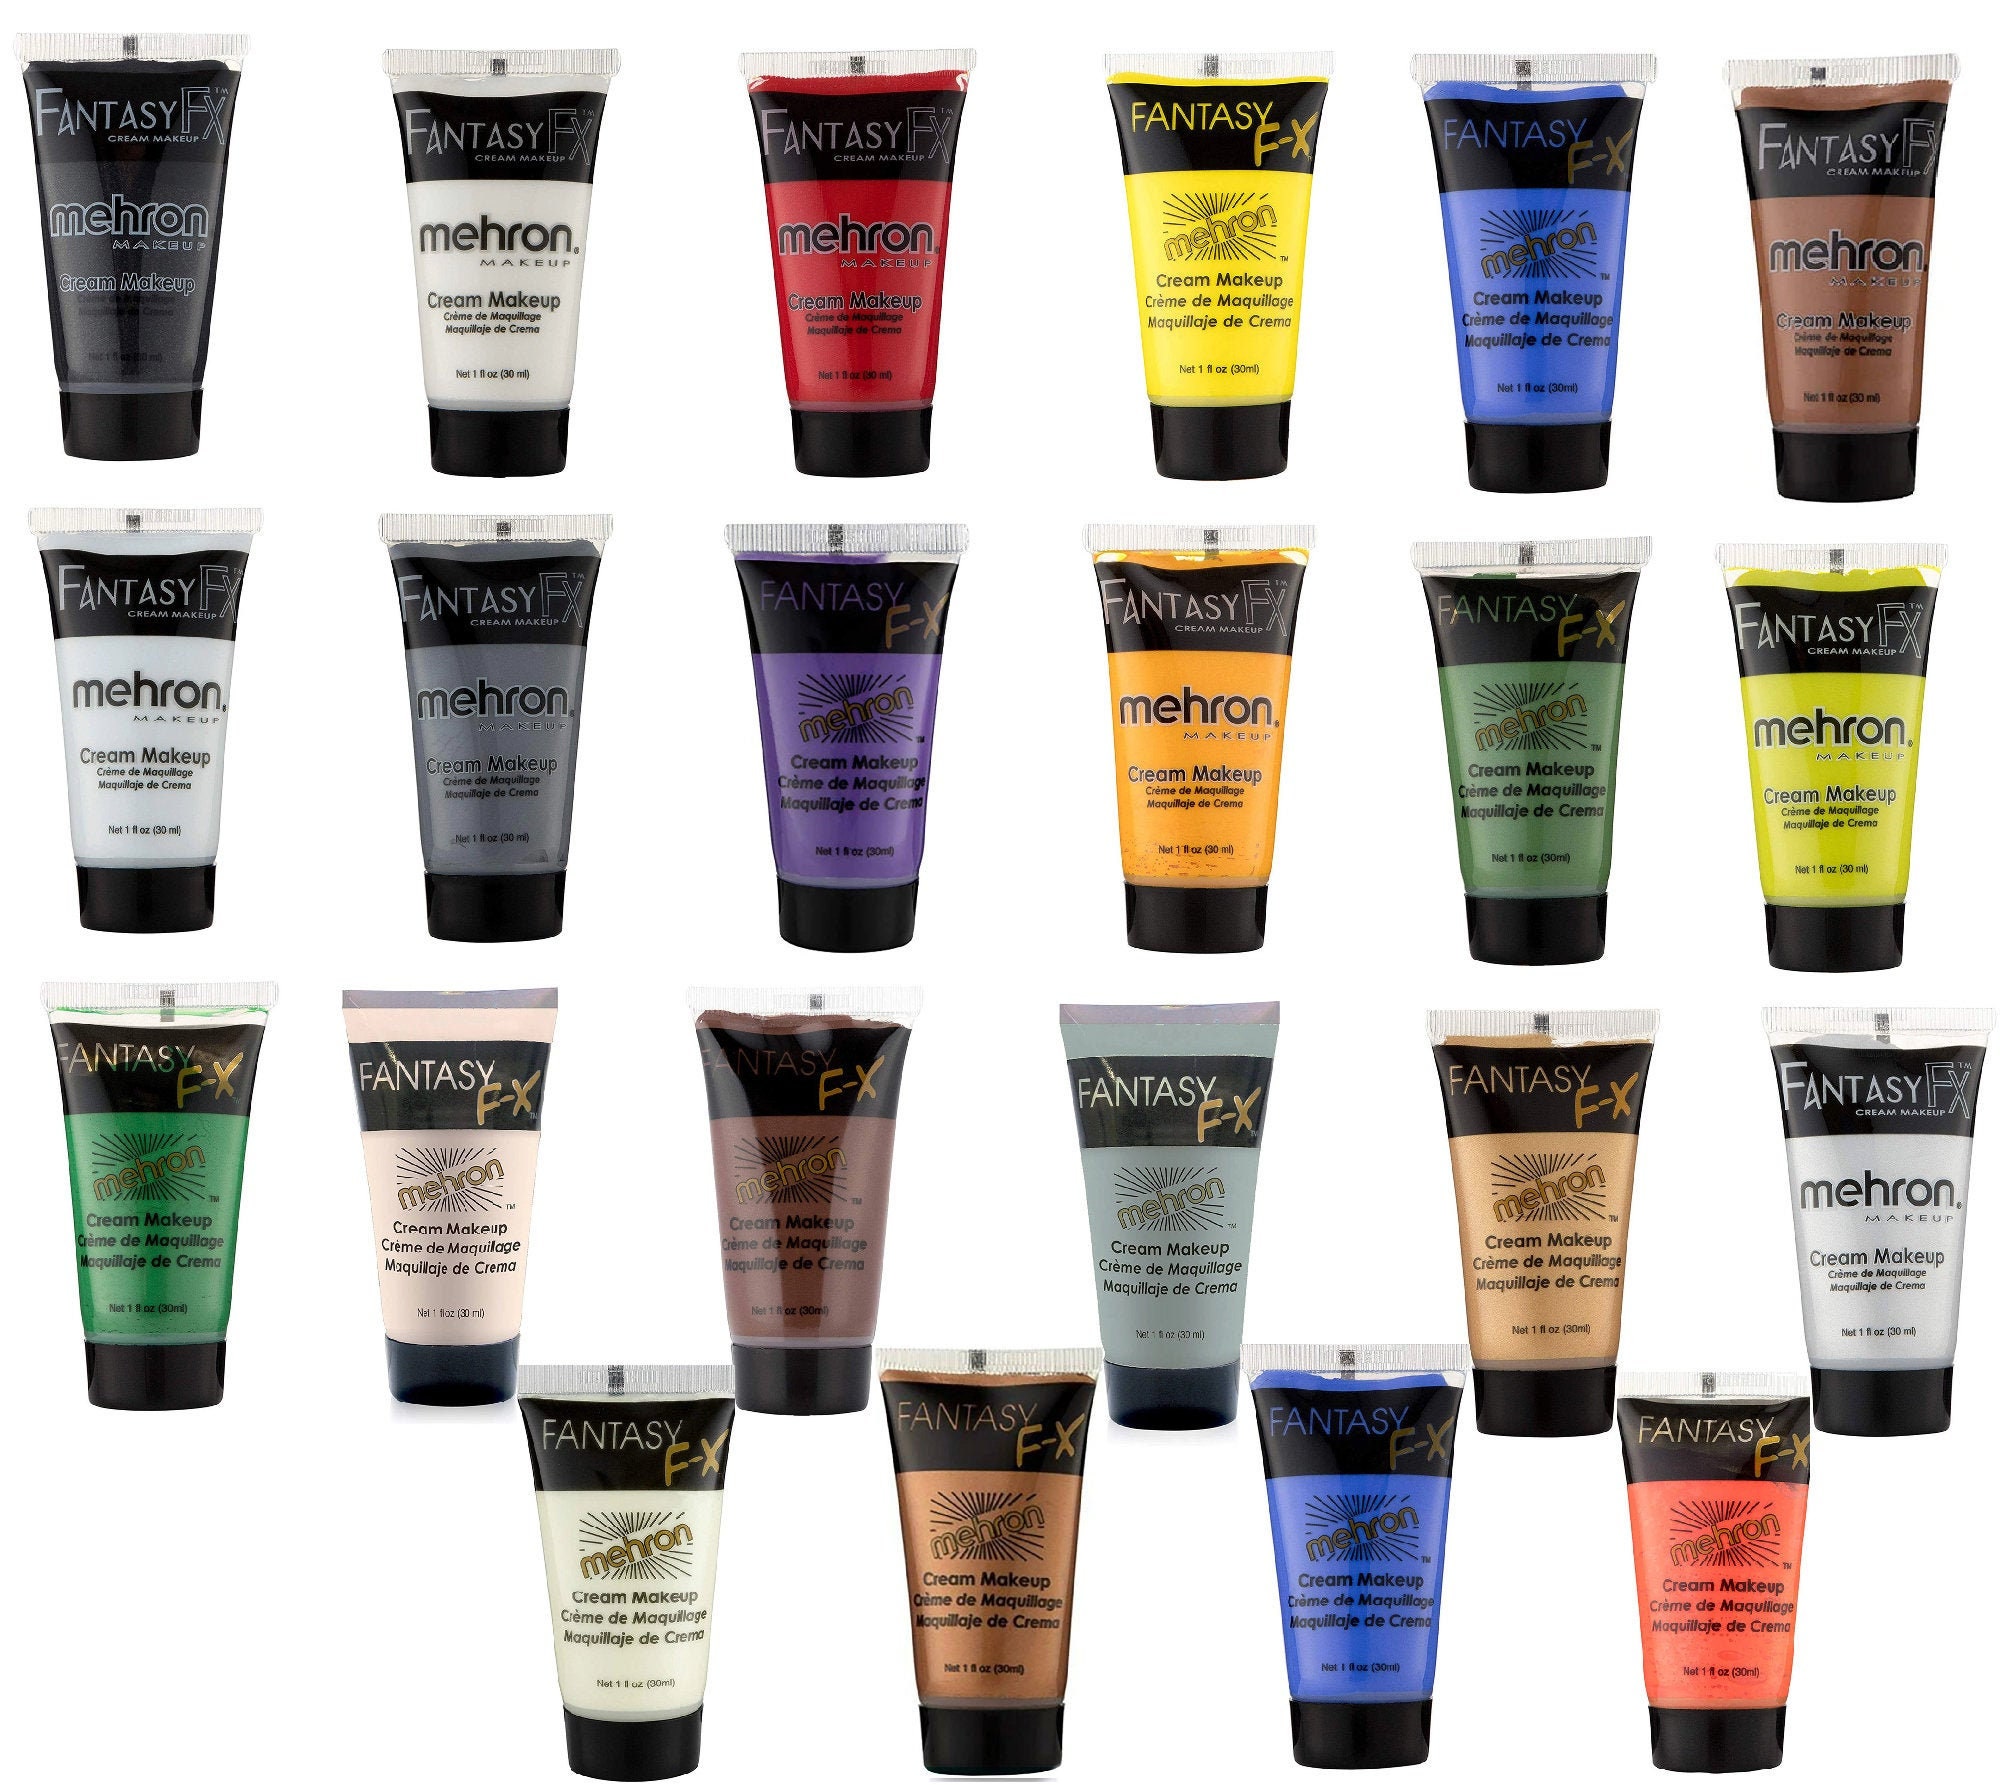 Mehron Makeup Fantasy F/X Water Based Face & Body Paint Black and